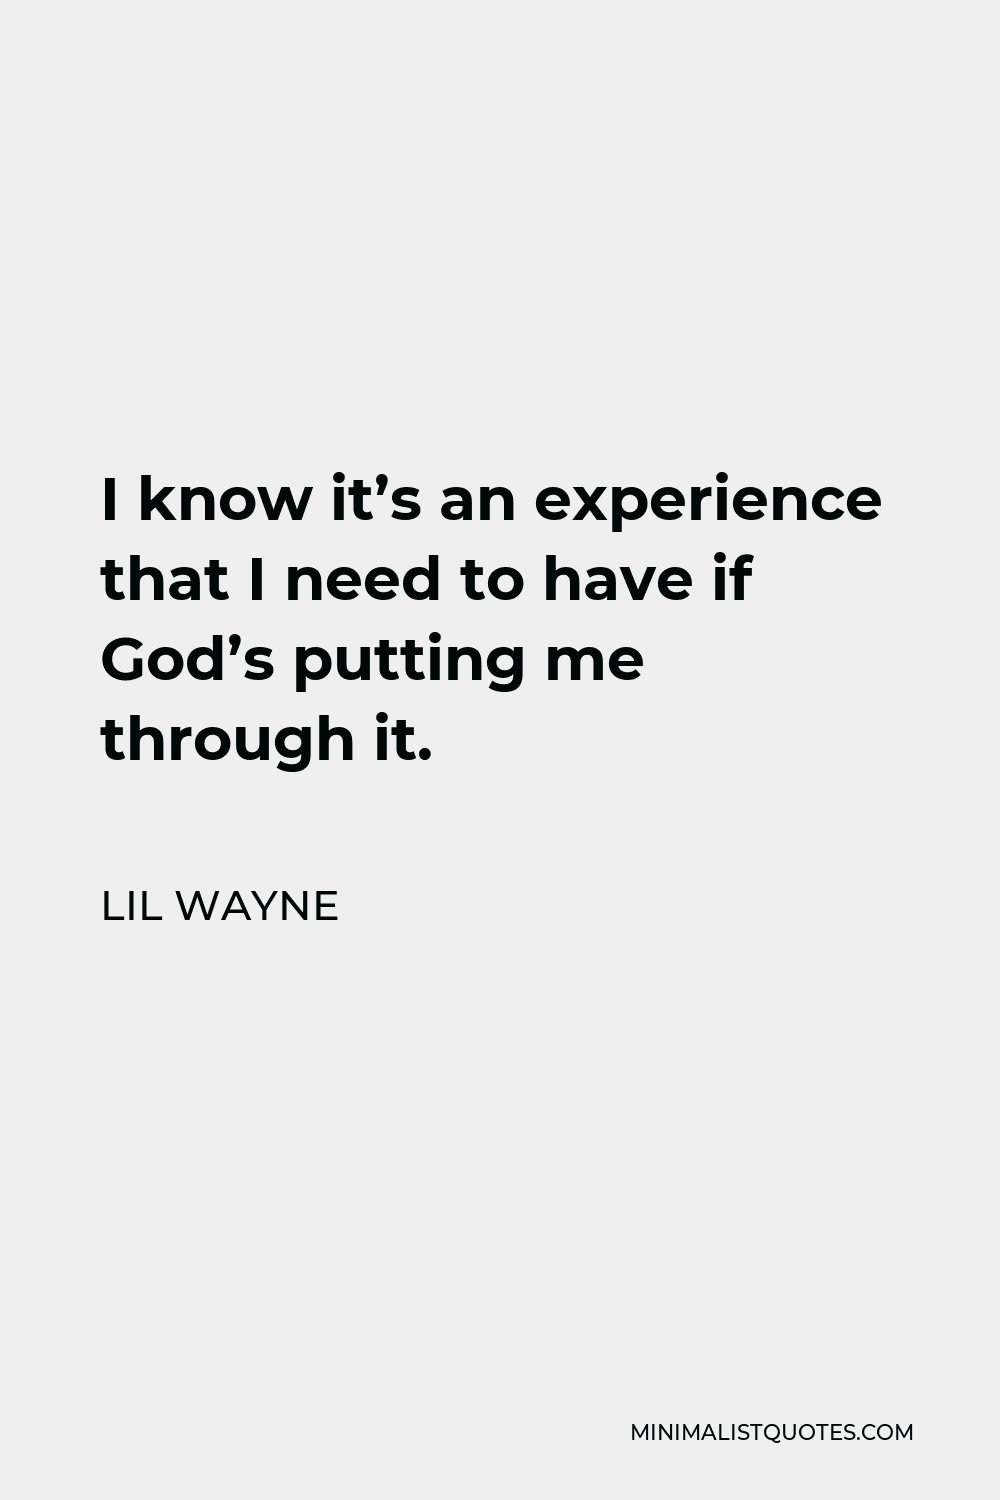 Lil Wayne Quote - I know it’s an experience that I need to have if God’s putting me through it.